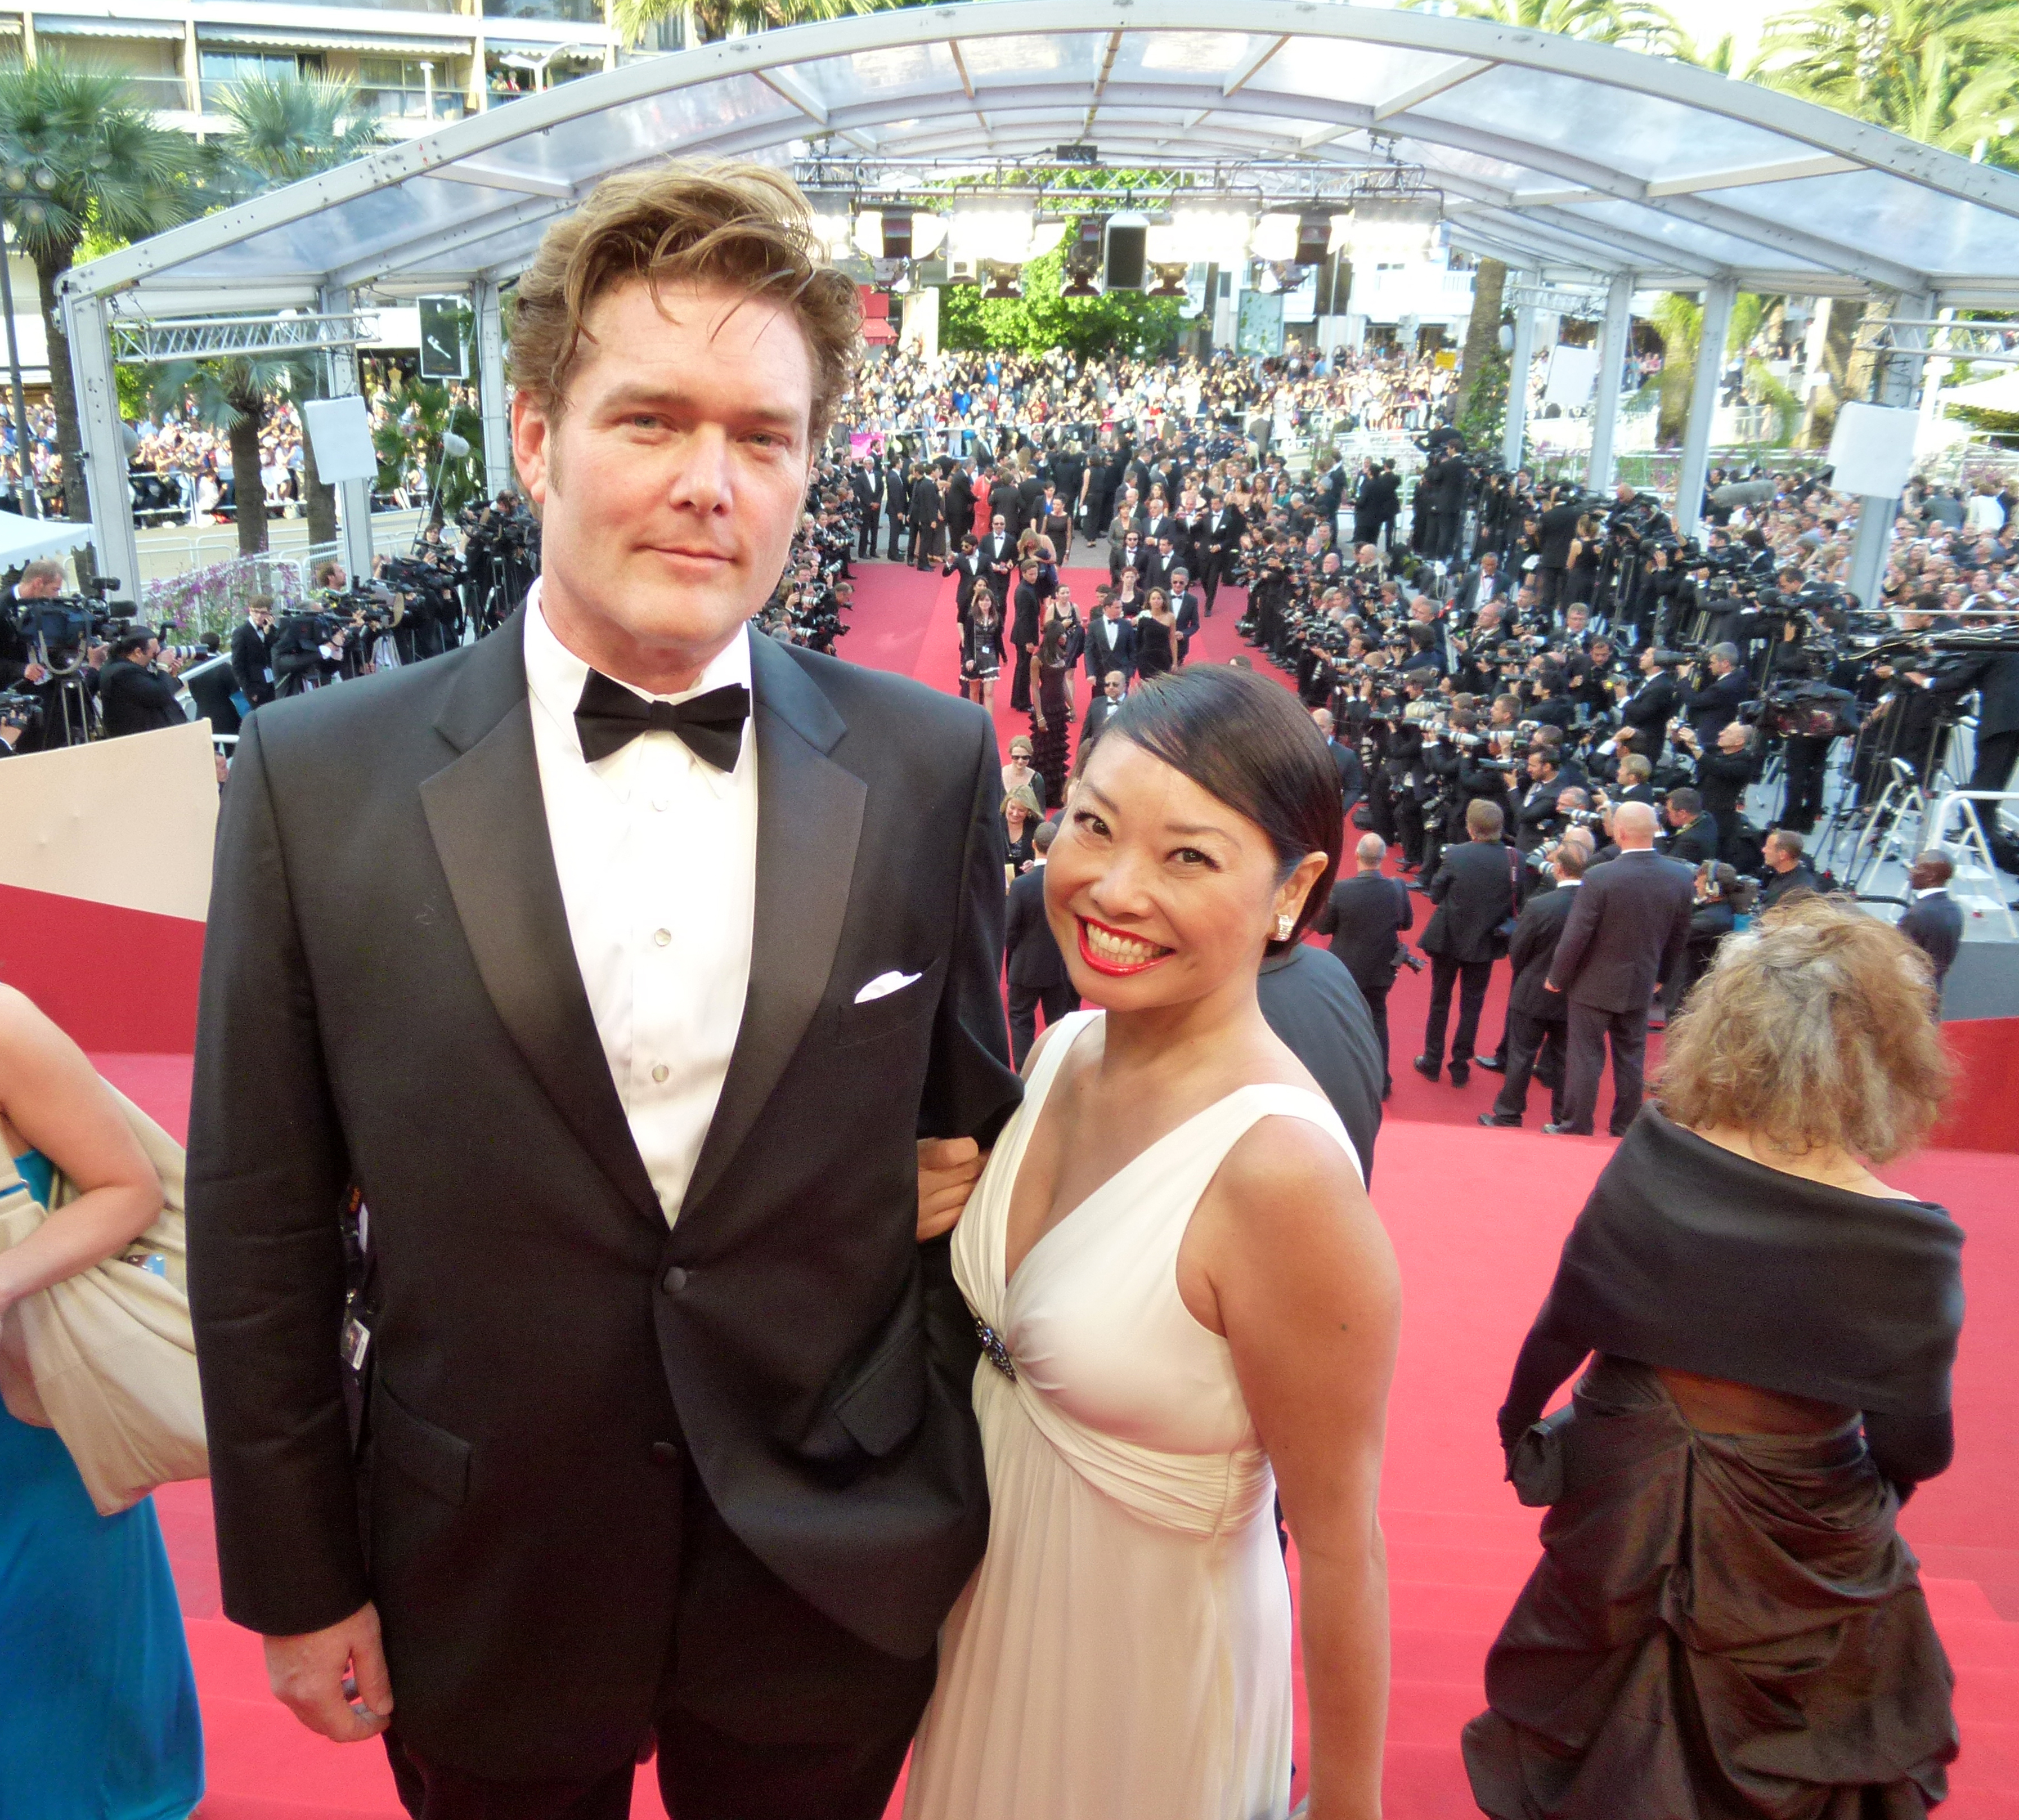 On the red carpet at The Cannes Film Festival for the premiere of THE BIG FIX.